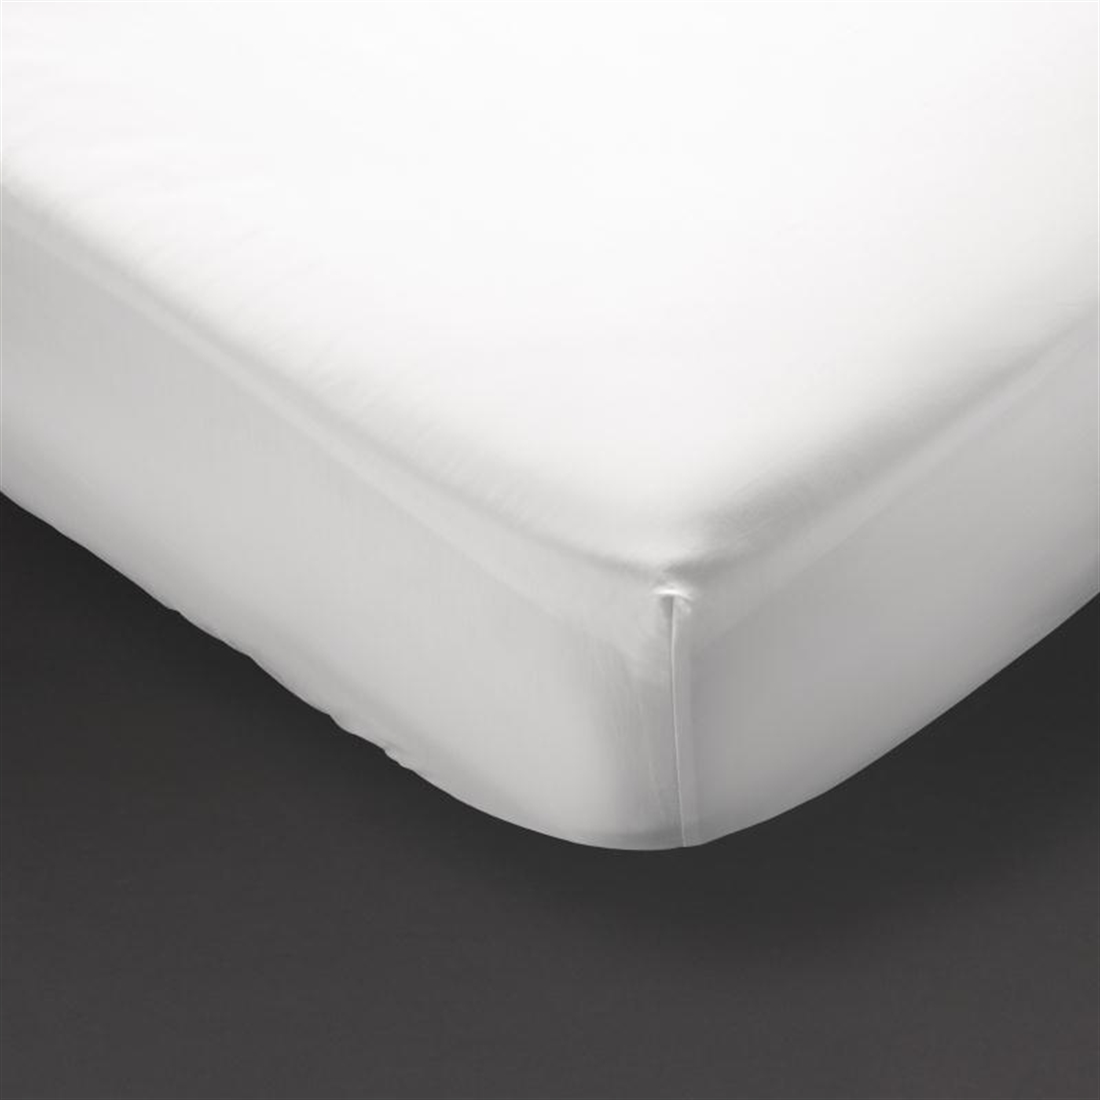 Mitre Comfort Egyptian Fitted Sheet Single